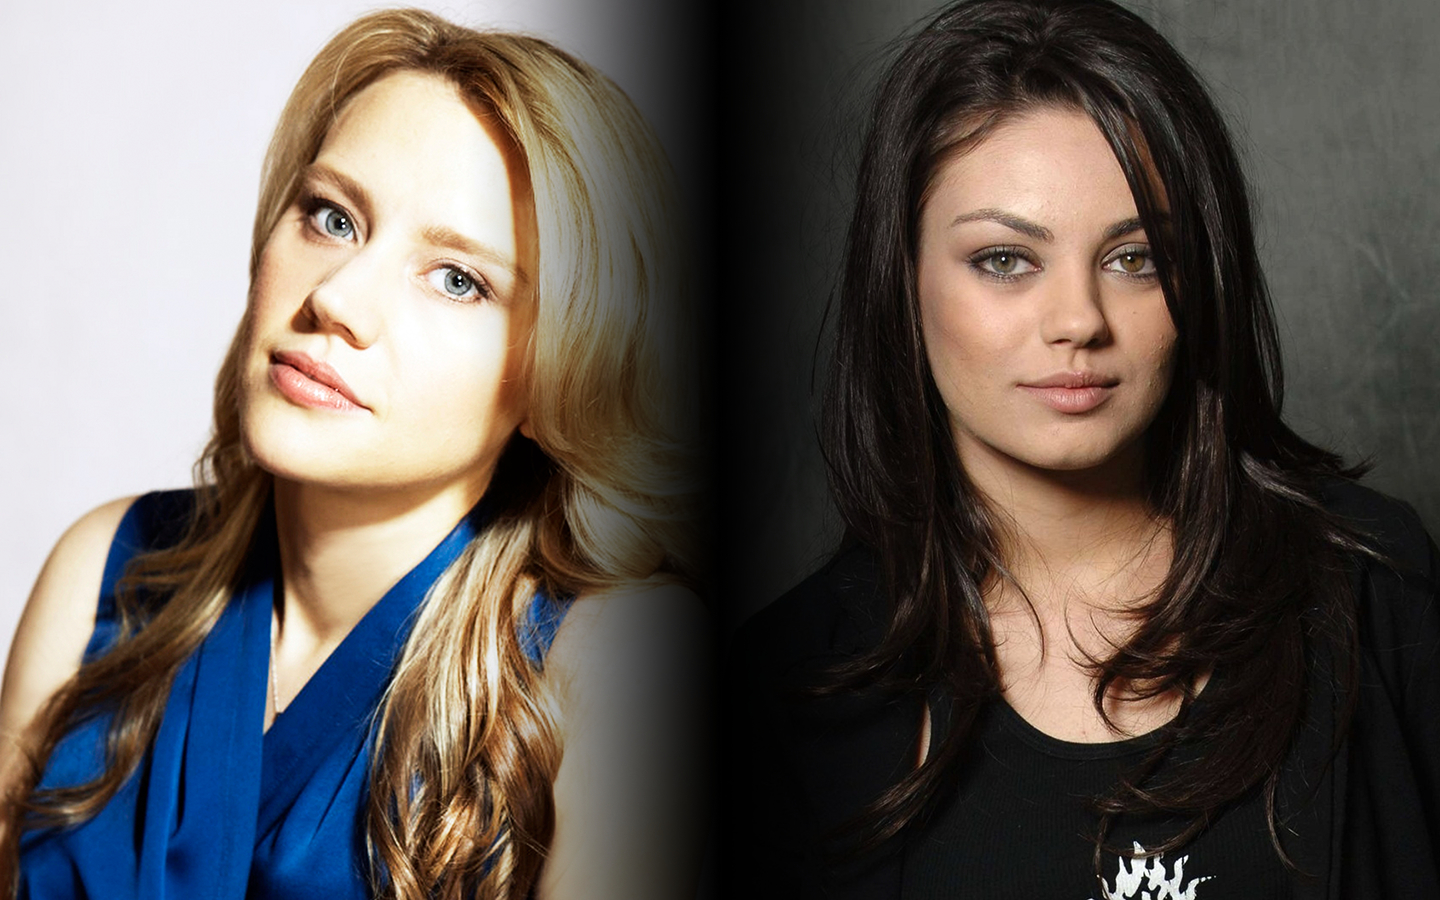 Mila Kunis and Kate McKinnon Teaming Up For ‘The Spy Who Dumped Me’